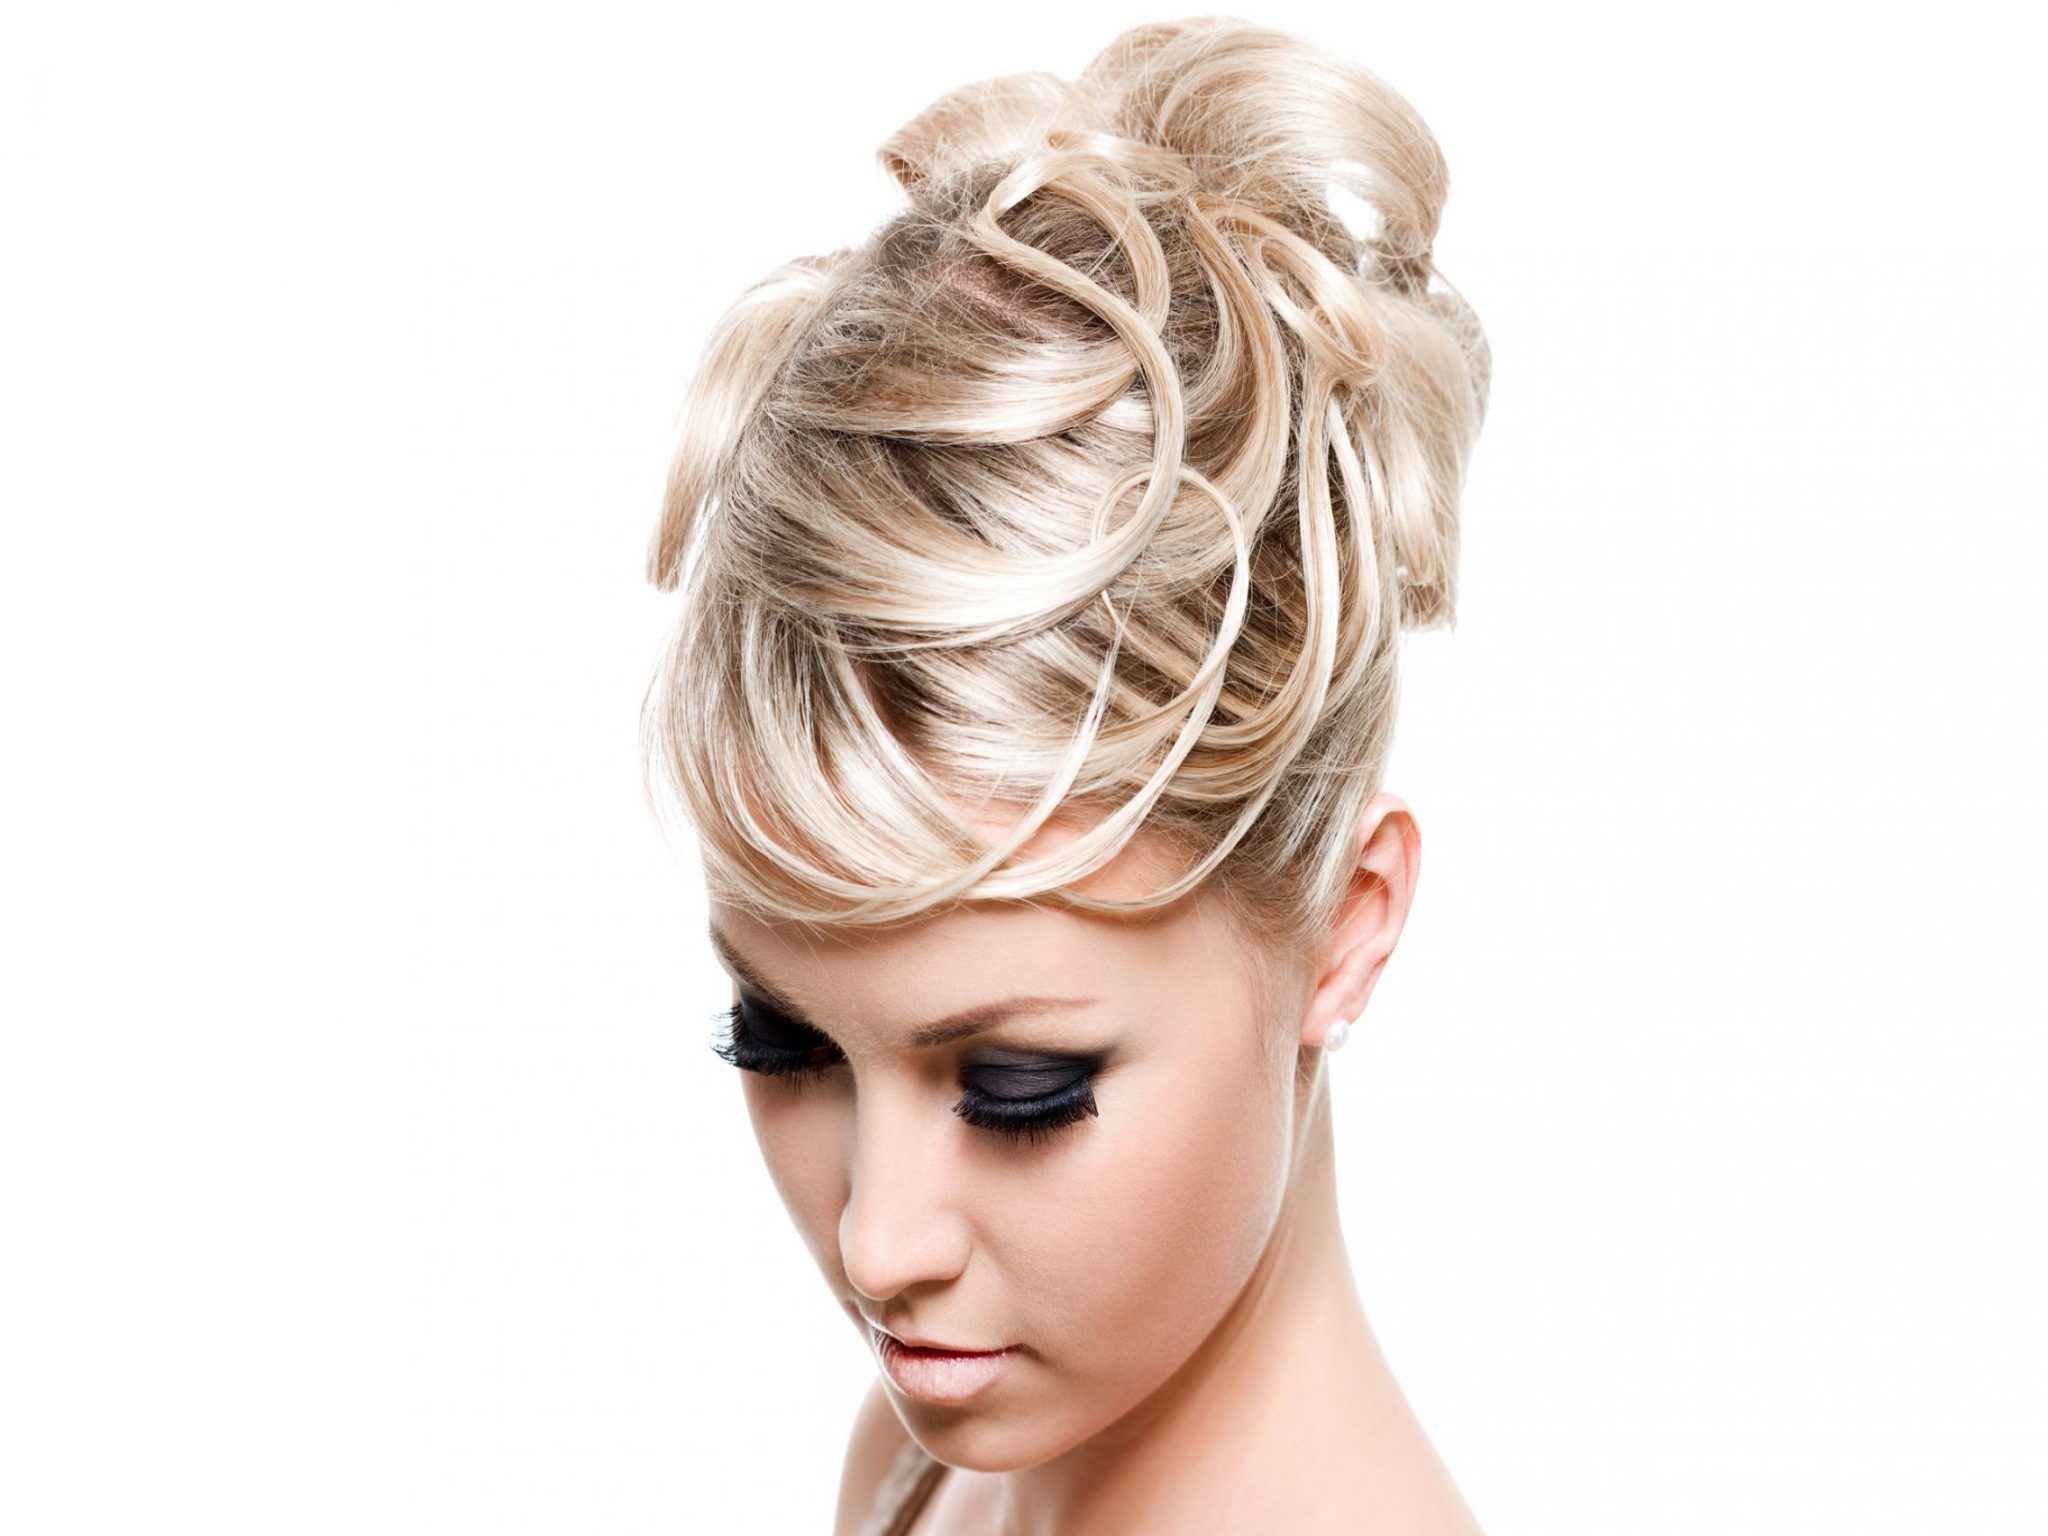 20 Best Women’s Hairstyle of 2015 - Blogrope